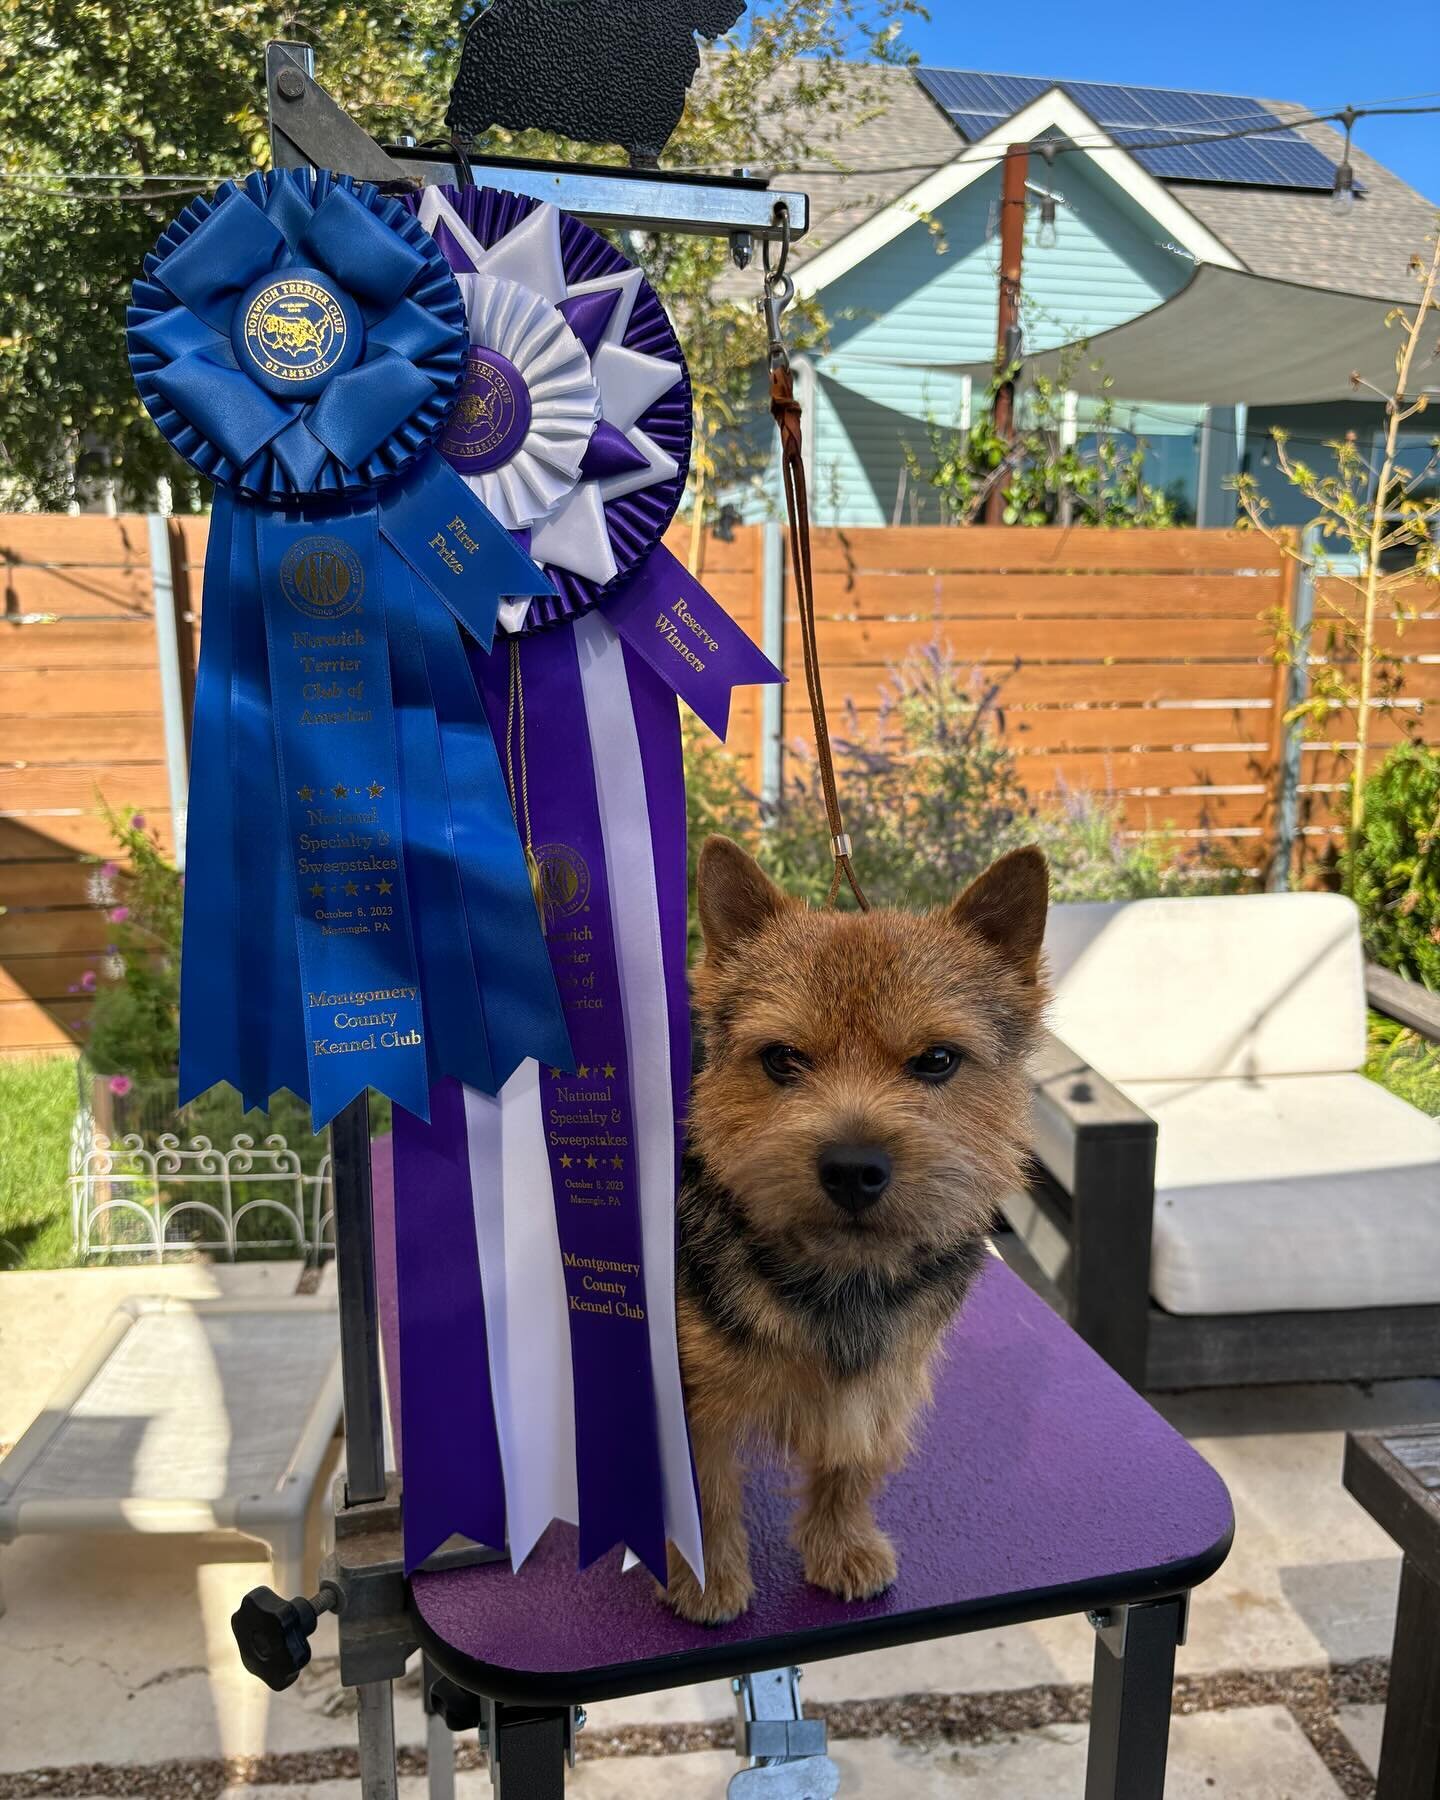 I took my friend Harrison up to PA for the big shows. On the biggest day (Montgomery) he went 1st out of his 12-15 month class and then on to reserve winners dog for a three-point major under judge Desi Murphy. He was the happiest little show dog and